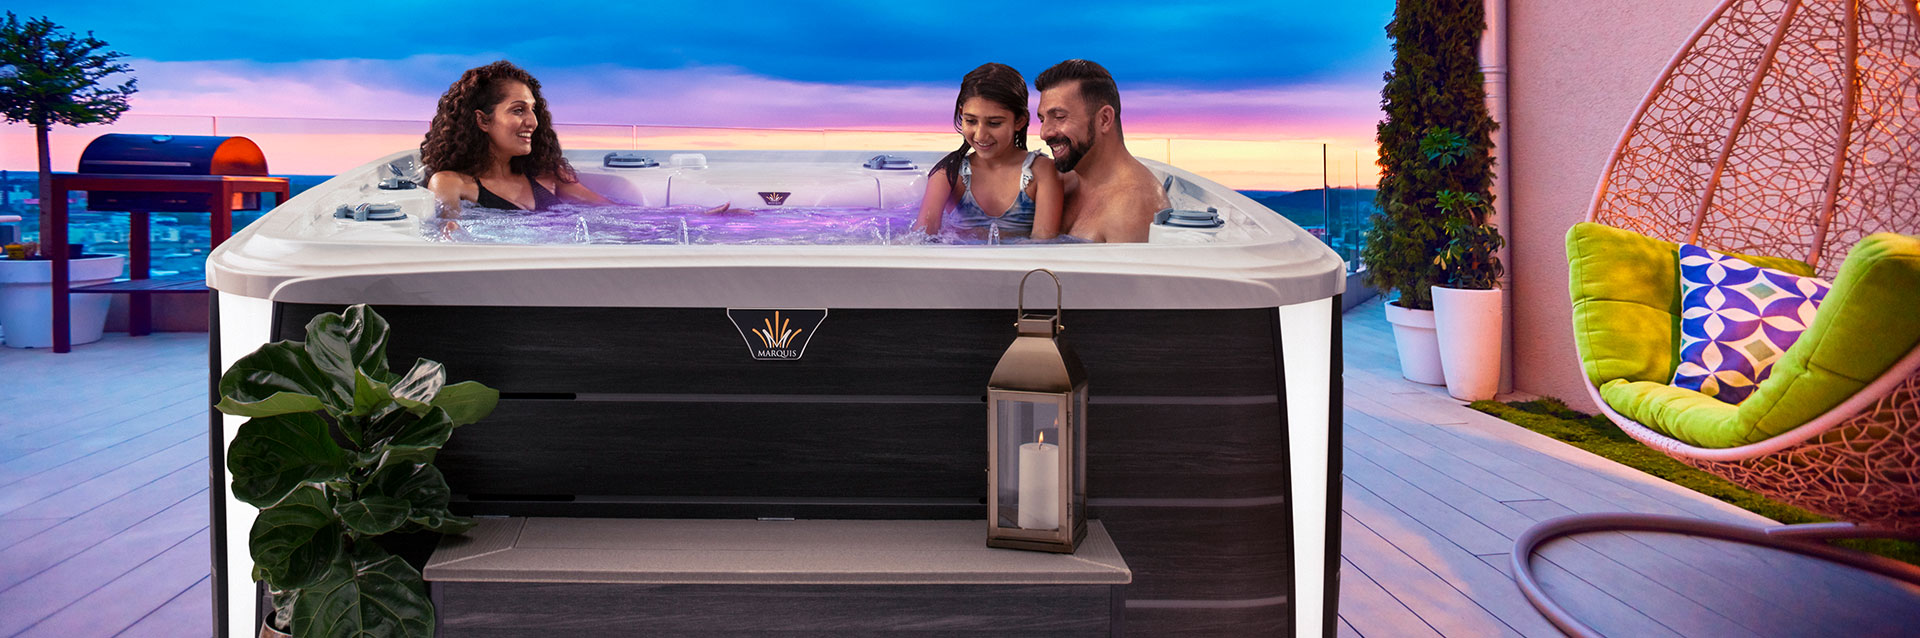 beauty image showing 6 person hot tubs